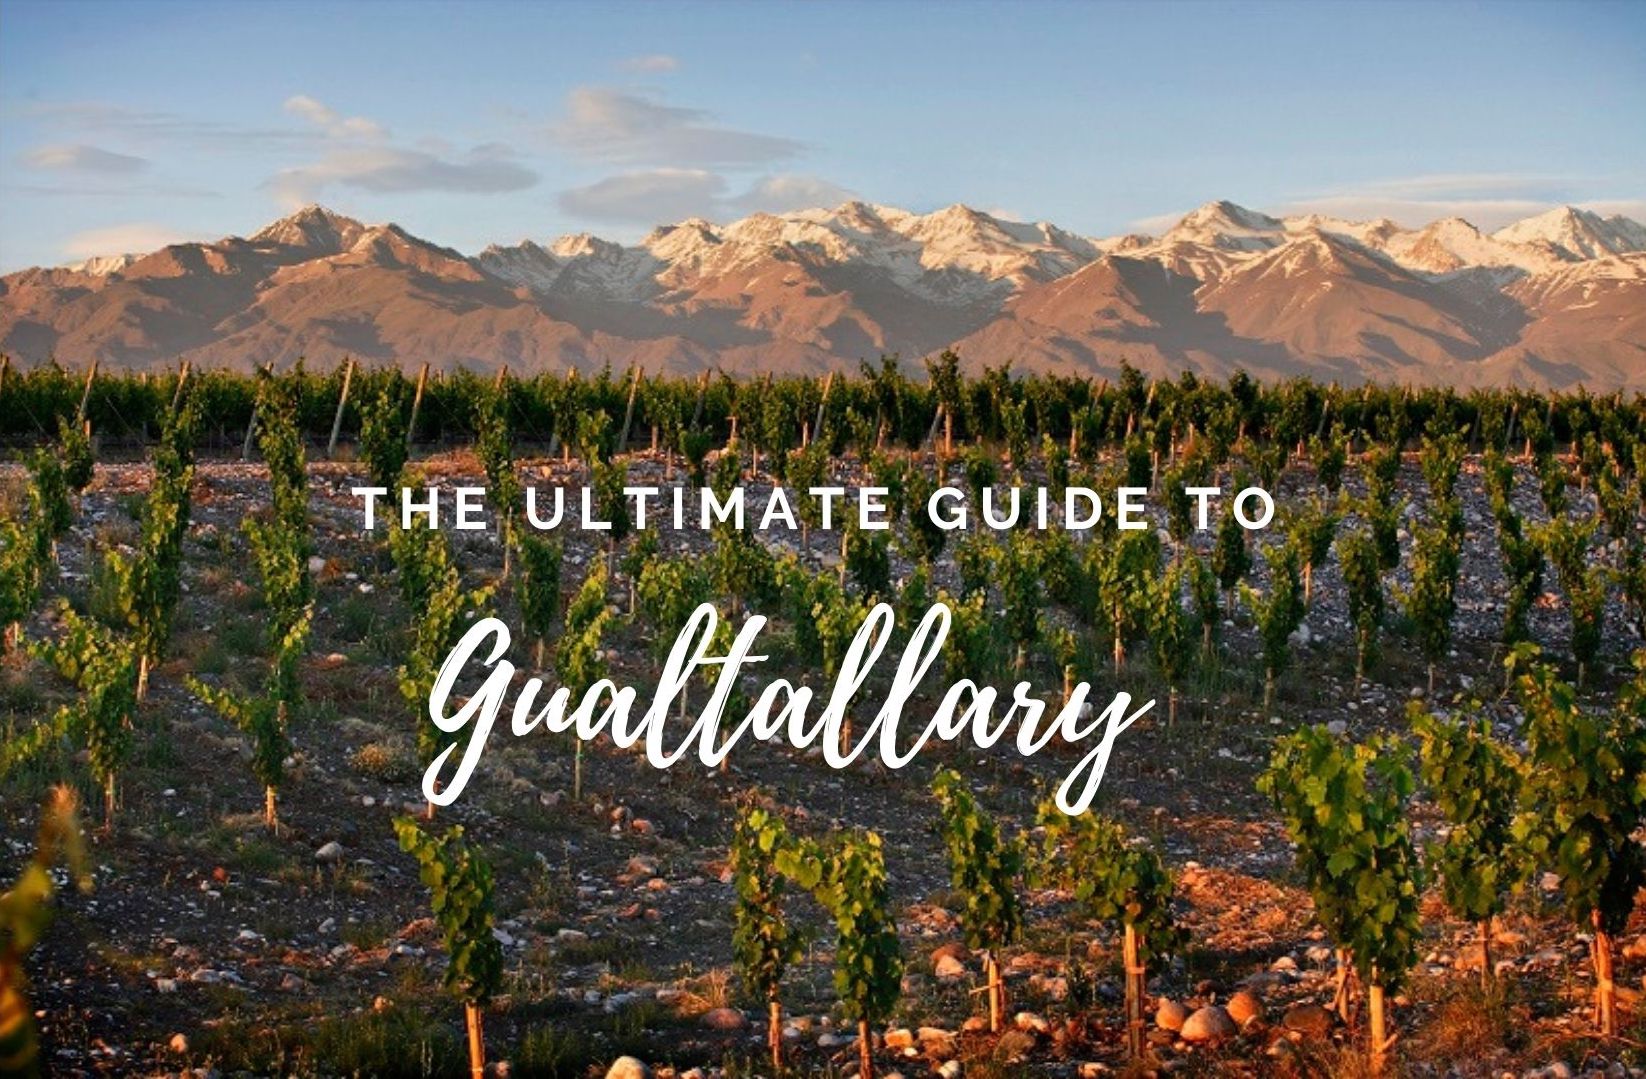 https://southamericawineguide.com/wp-content/uploads/2021/11/the-ultimate-guide-to-Gualtallary.jpg